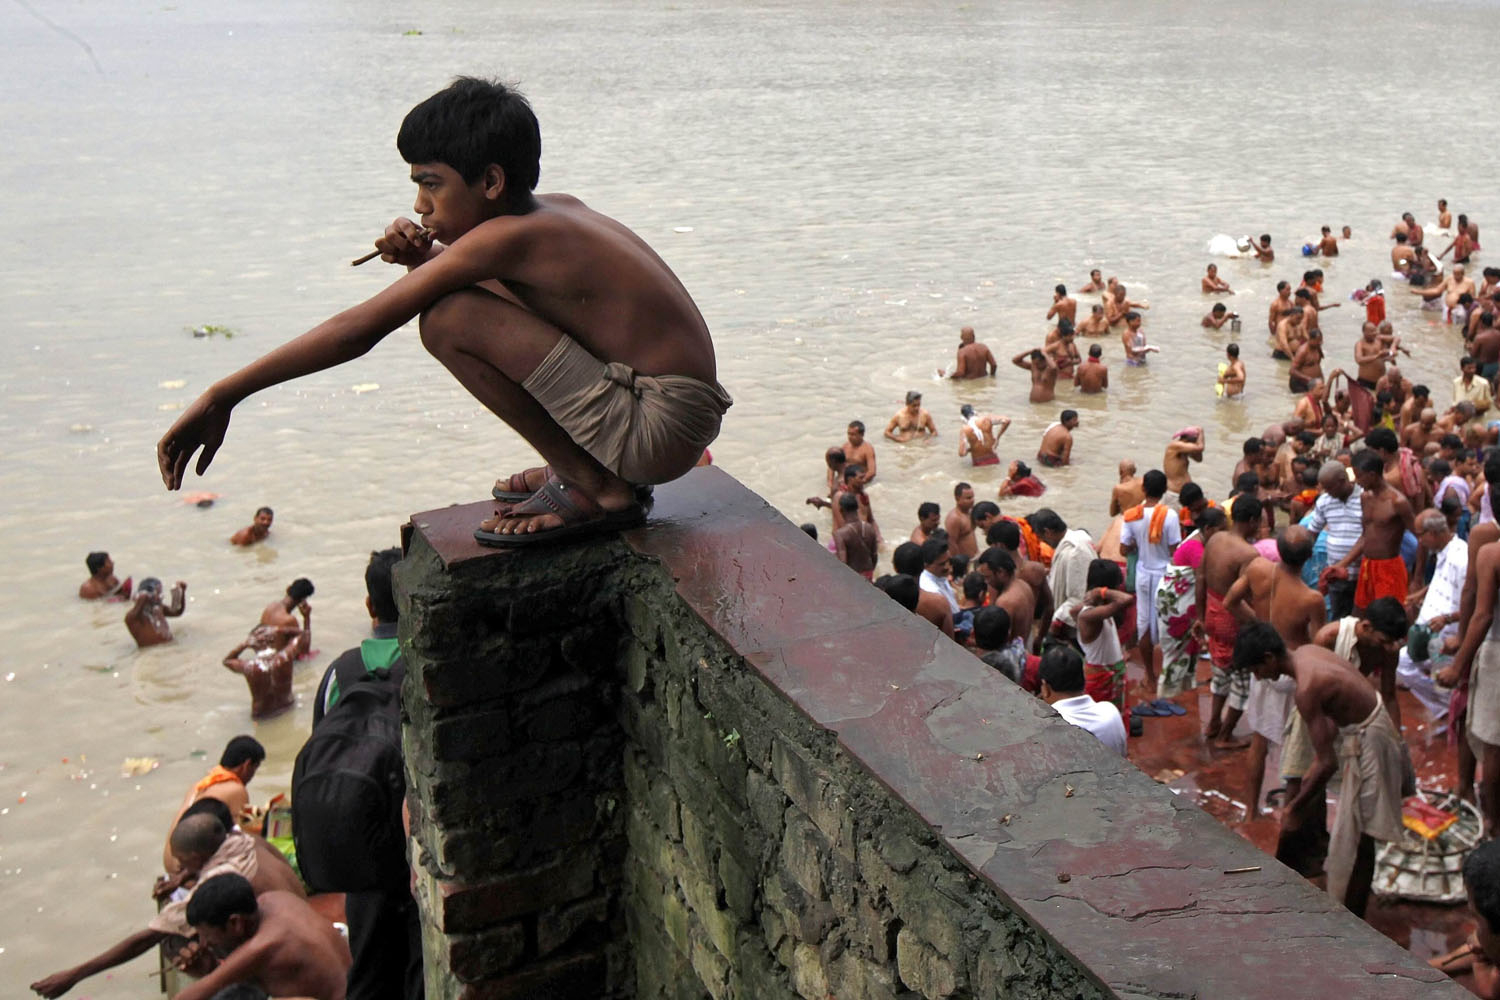 A Hindu boy brushes his teeth with a neem twig as others take a dip on the banks of the Ganges river on the holy day of "Mahalaya" in Kolkata